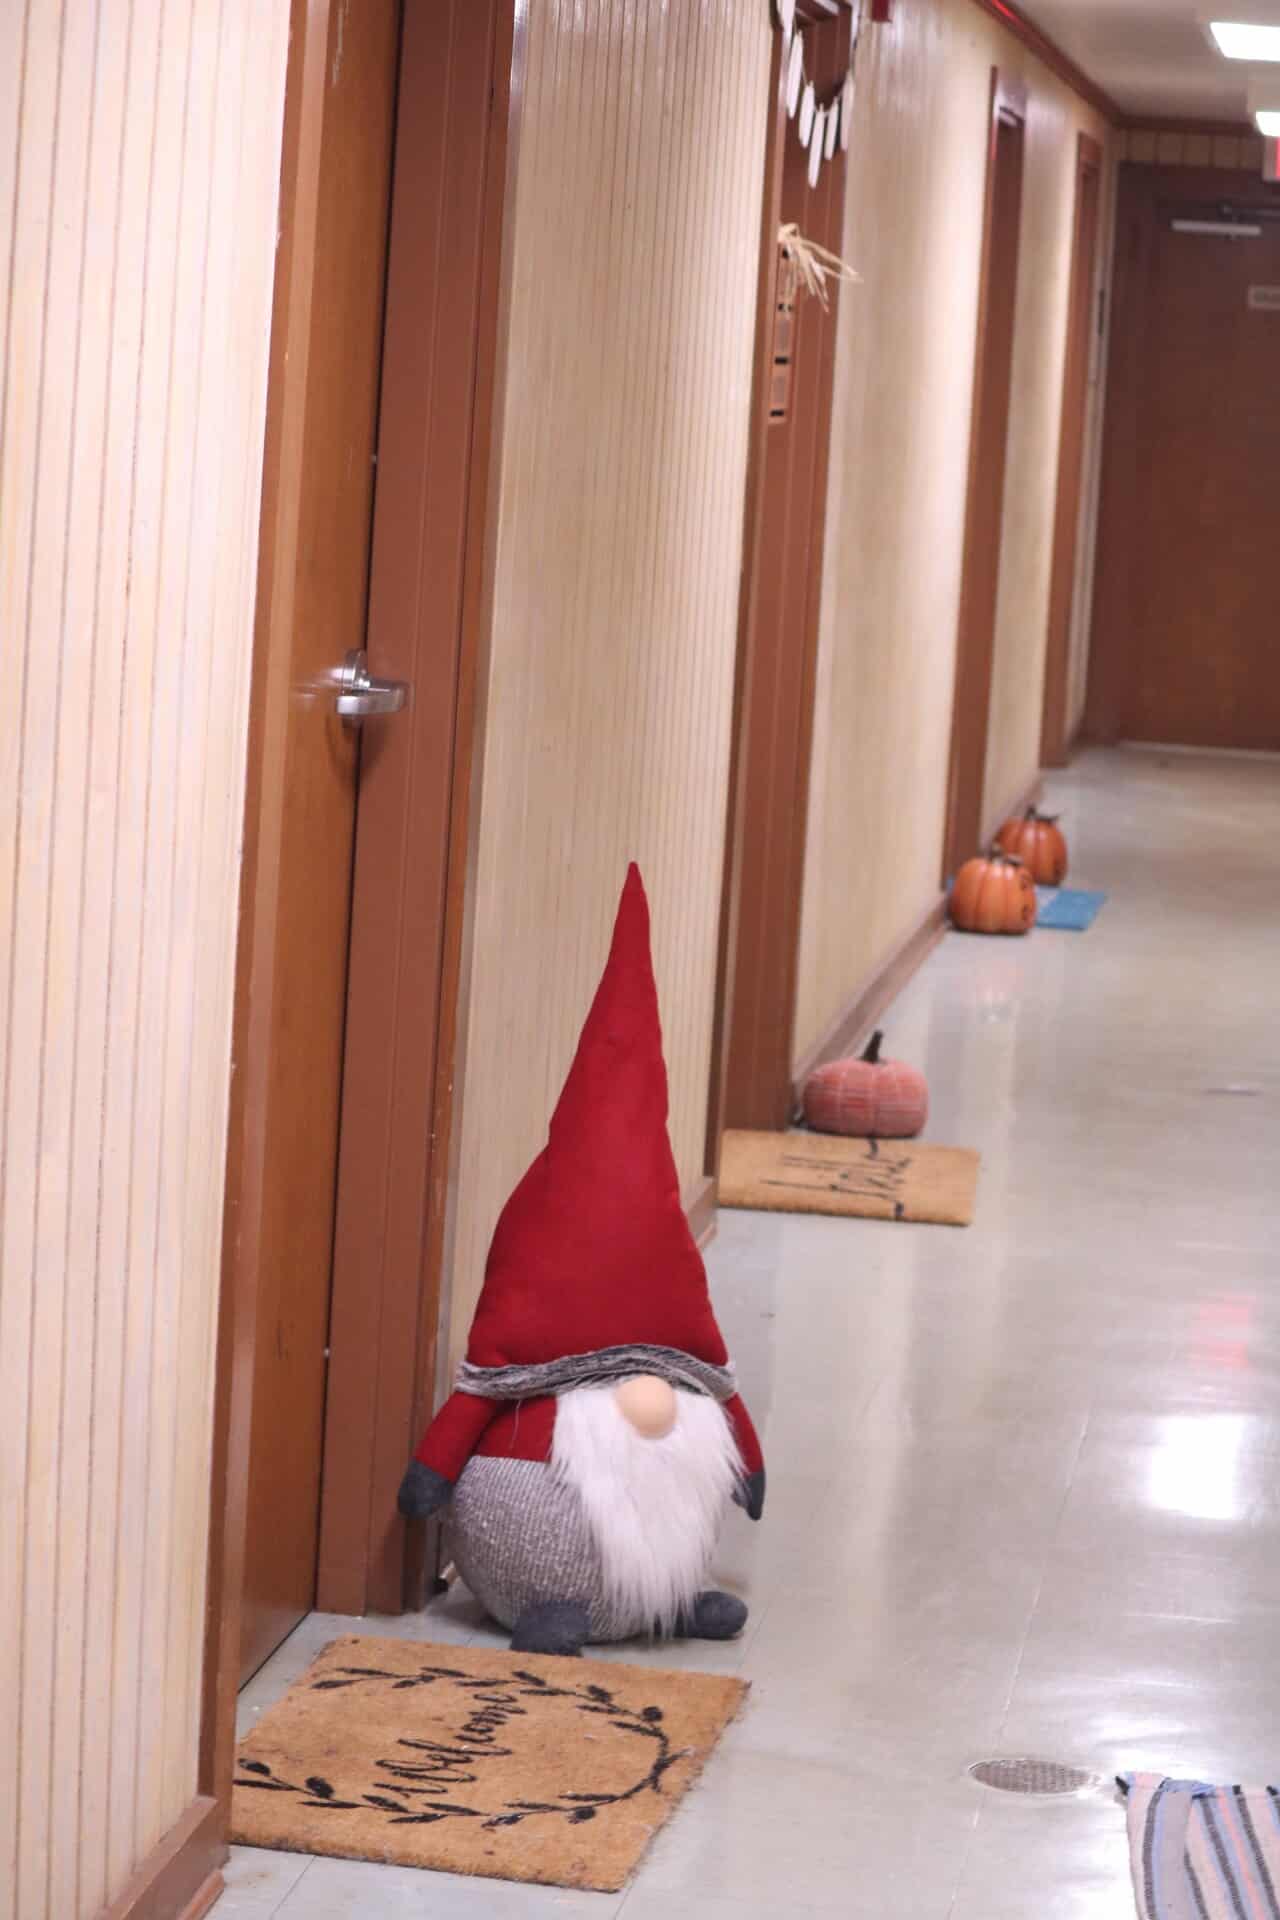 Christmas elves have begun to patrol the halls of making sure Christmas spirit is filling the dorms on campus.